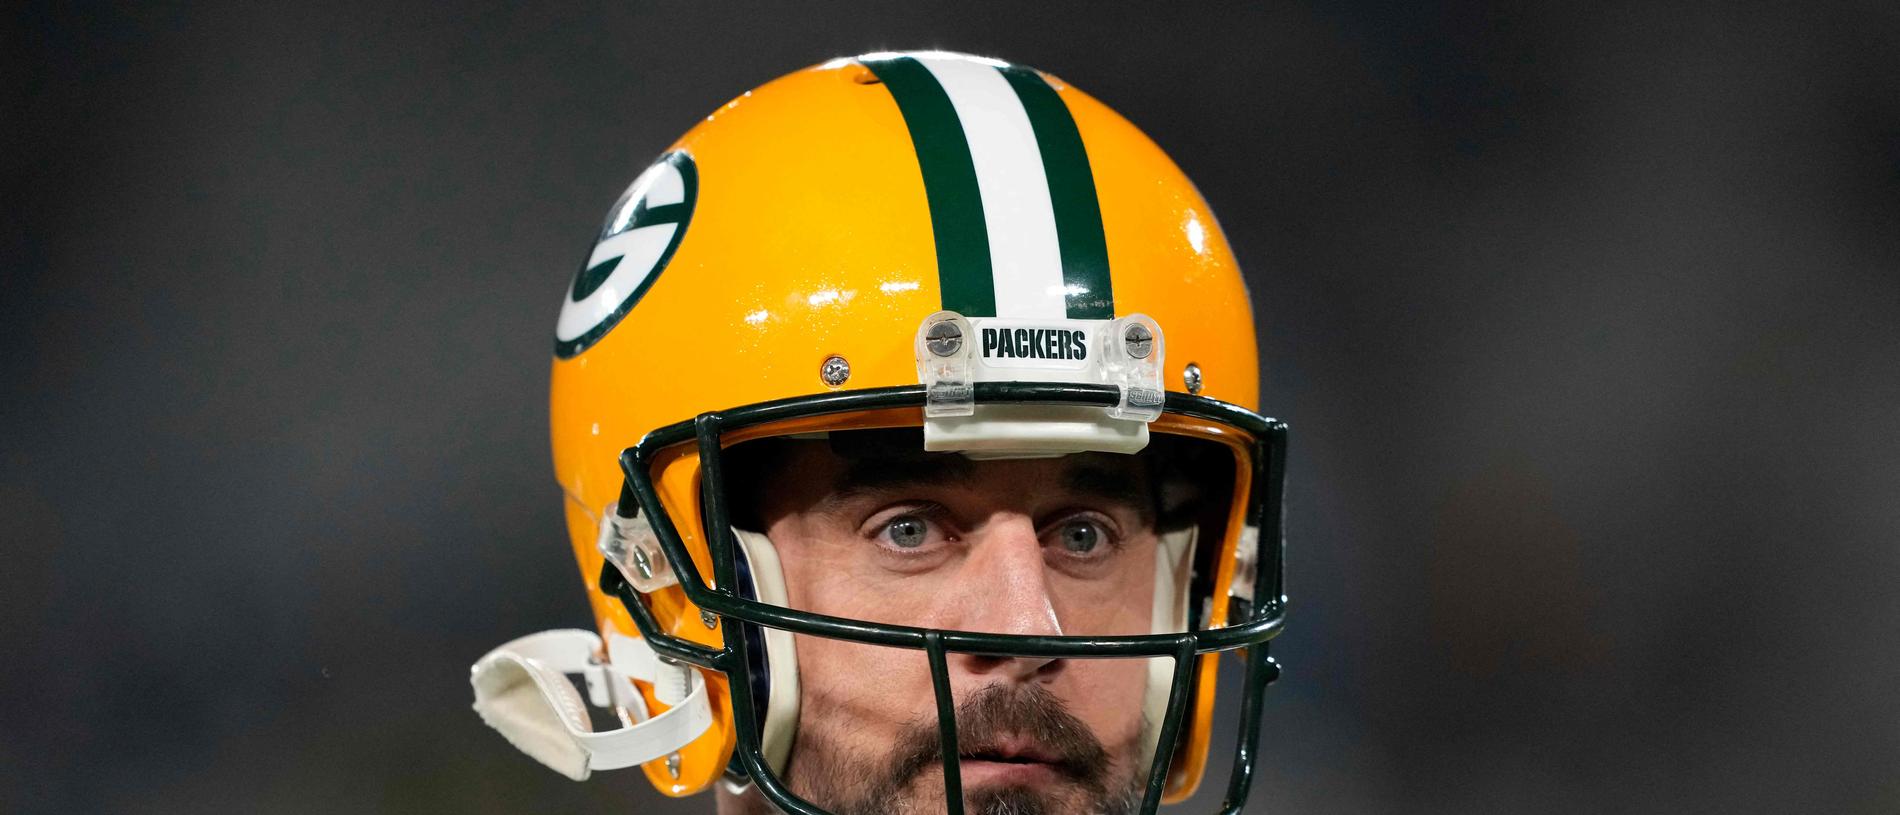 Aaron Rodgers injury: Jets' backup QB options in free agency, trade